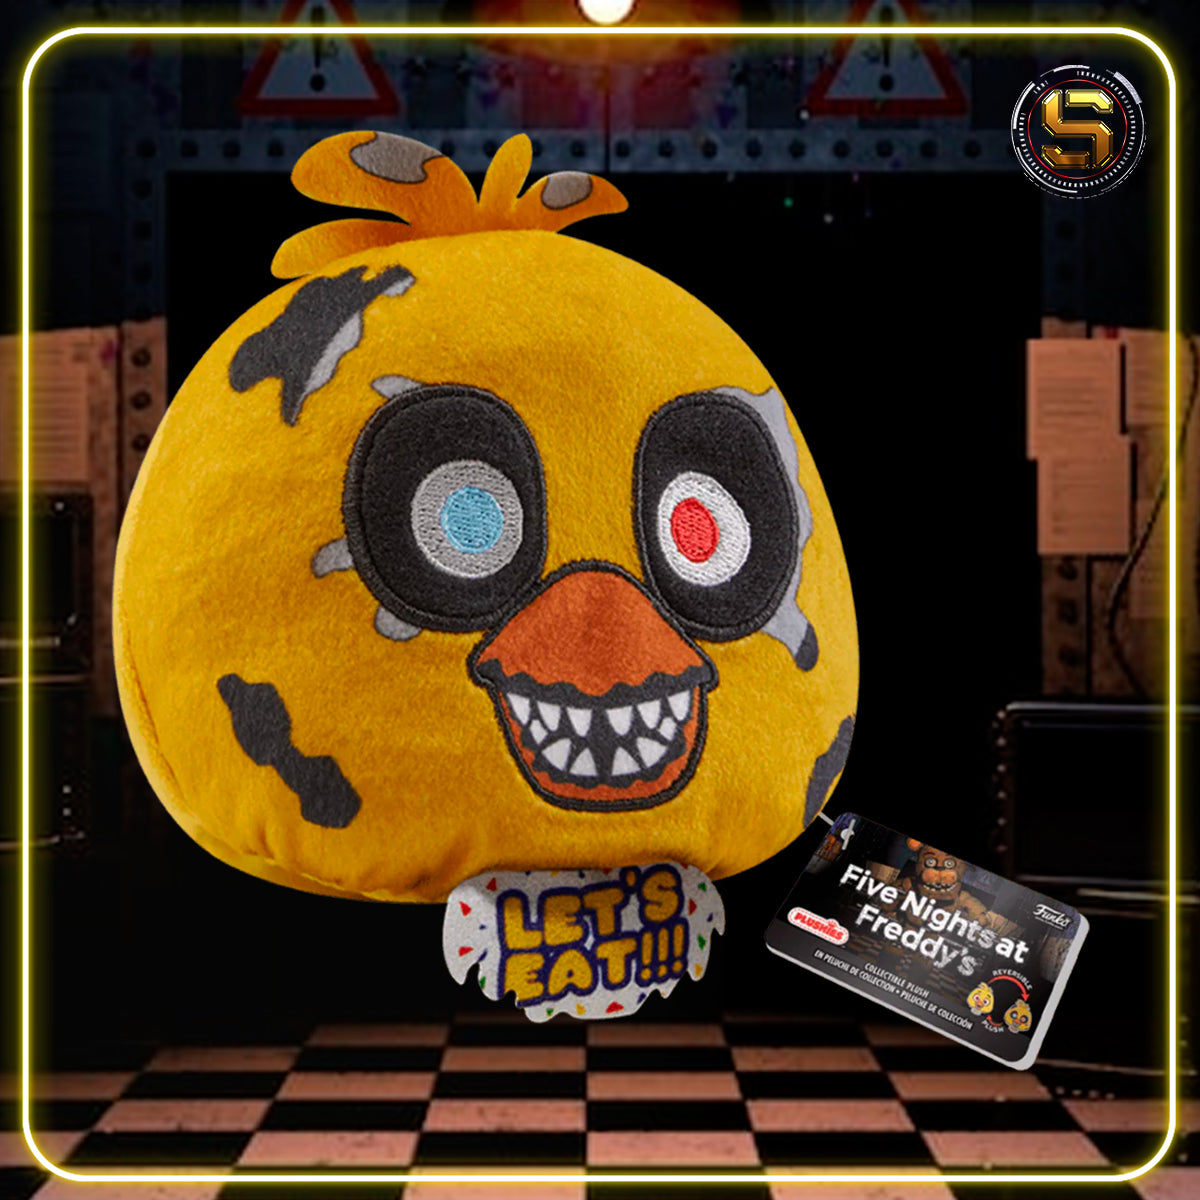 Five Nights At Freddy's Chica Reversible Plush